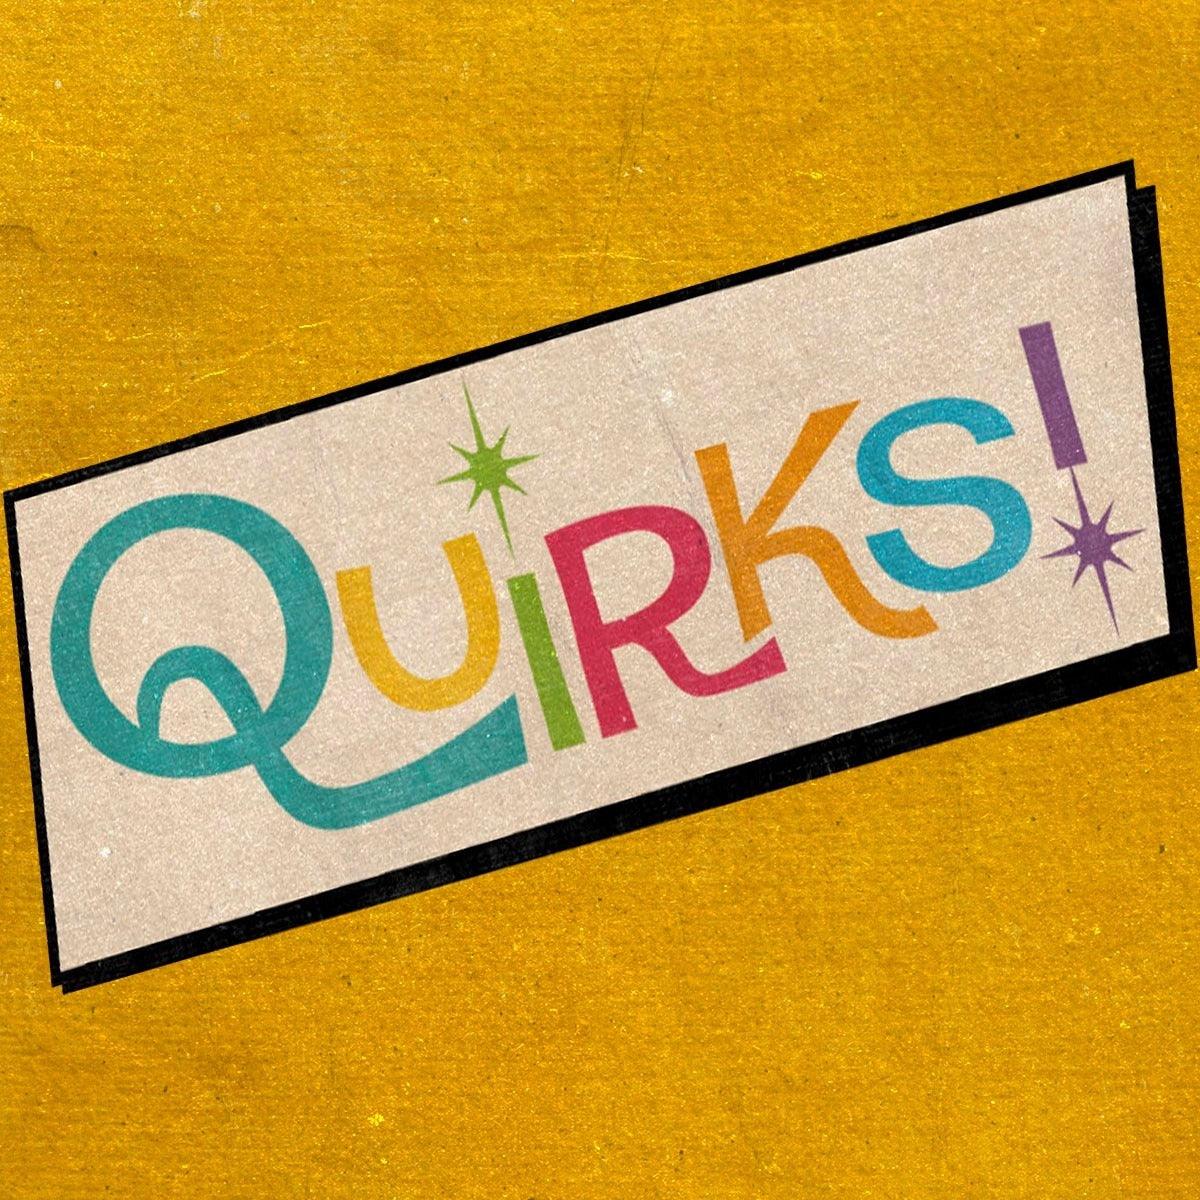 Great Gifts - Quirks!